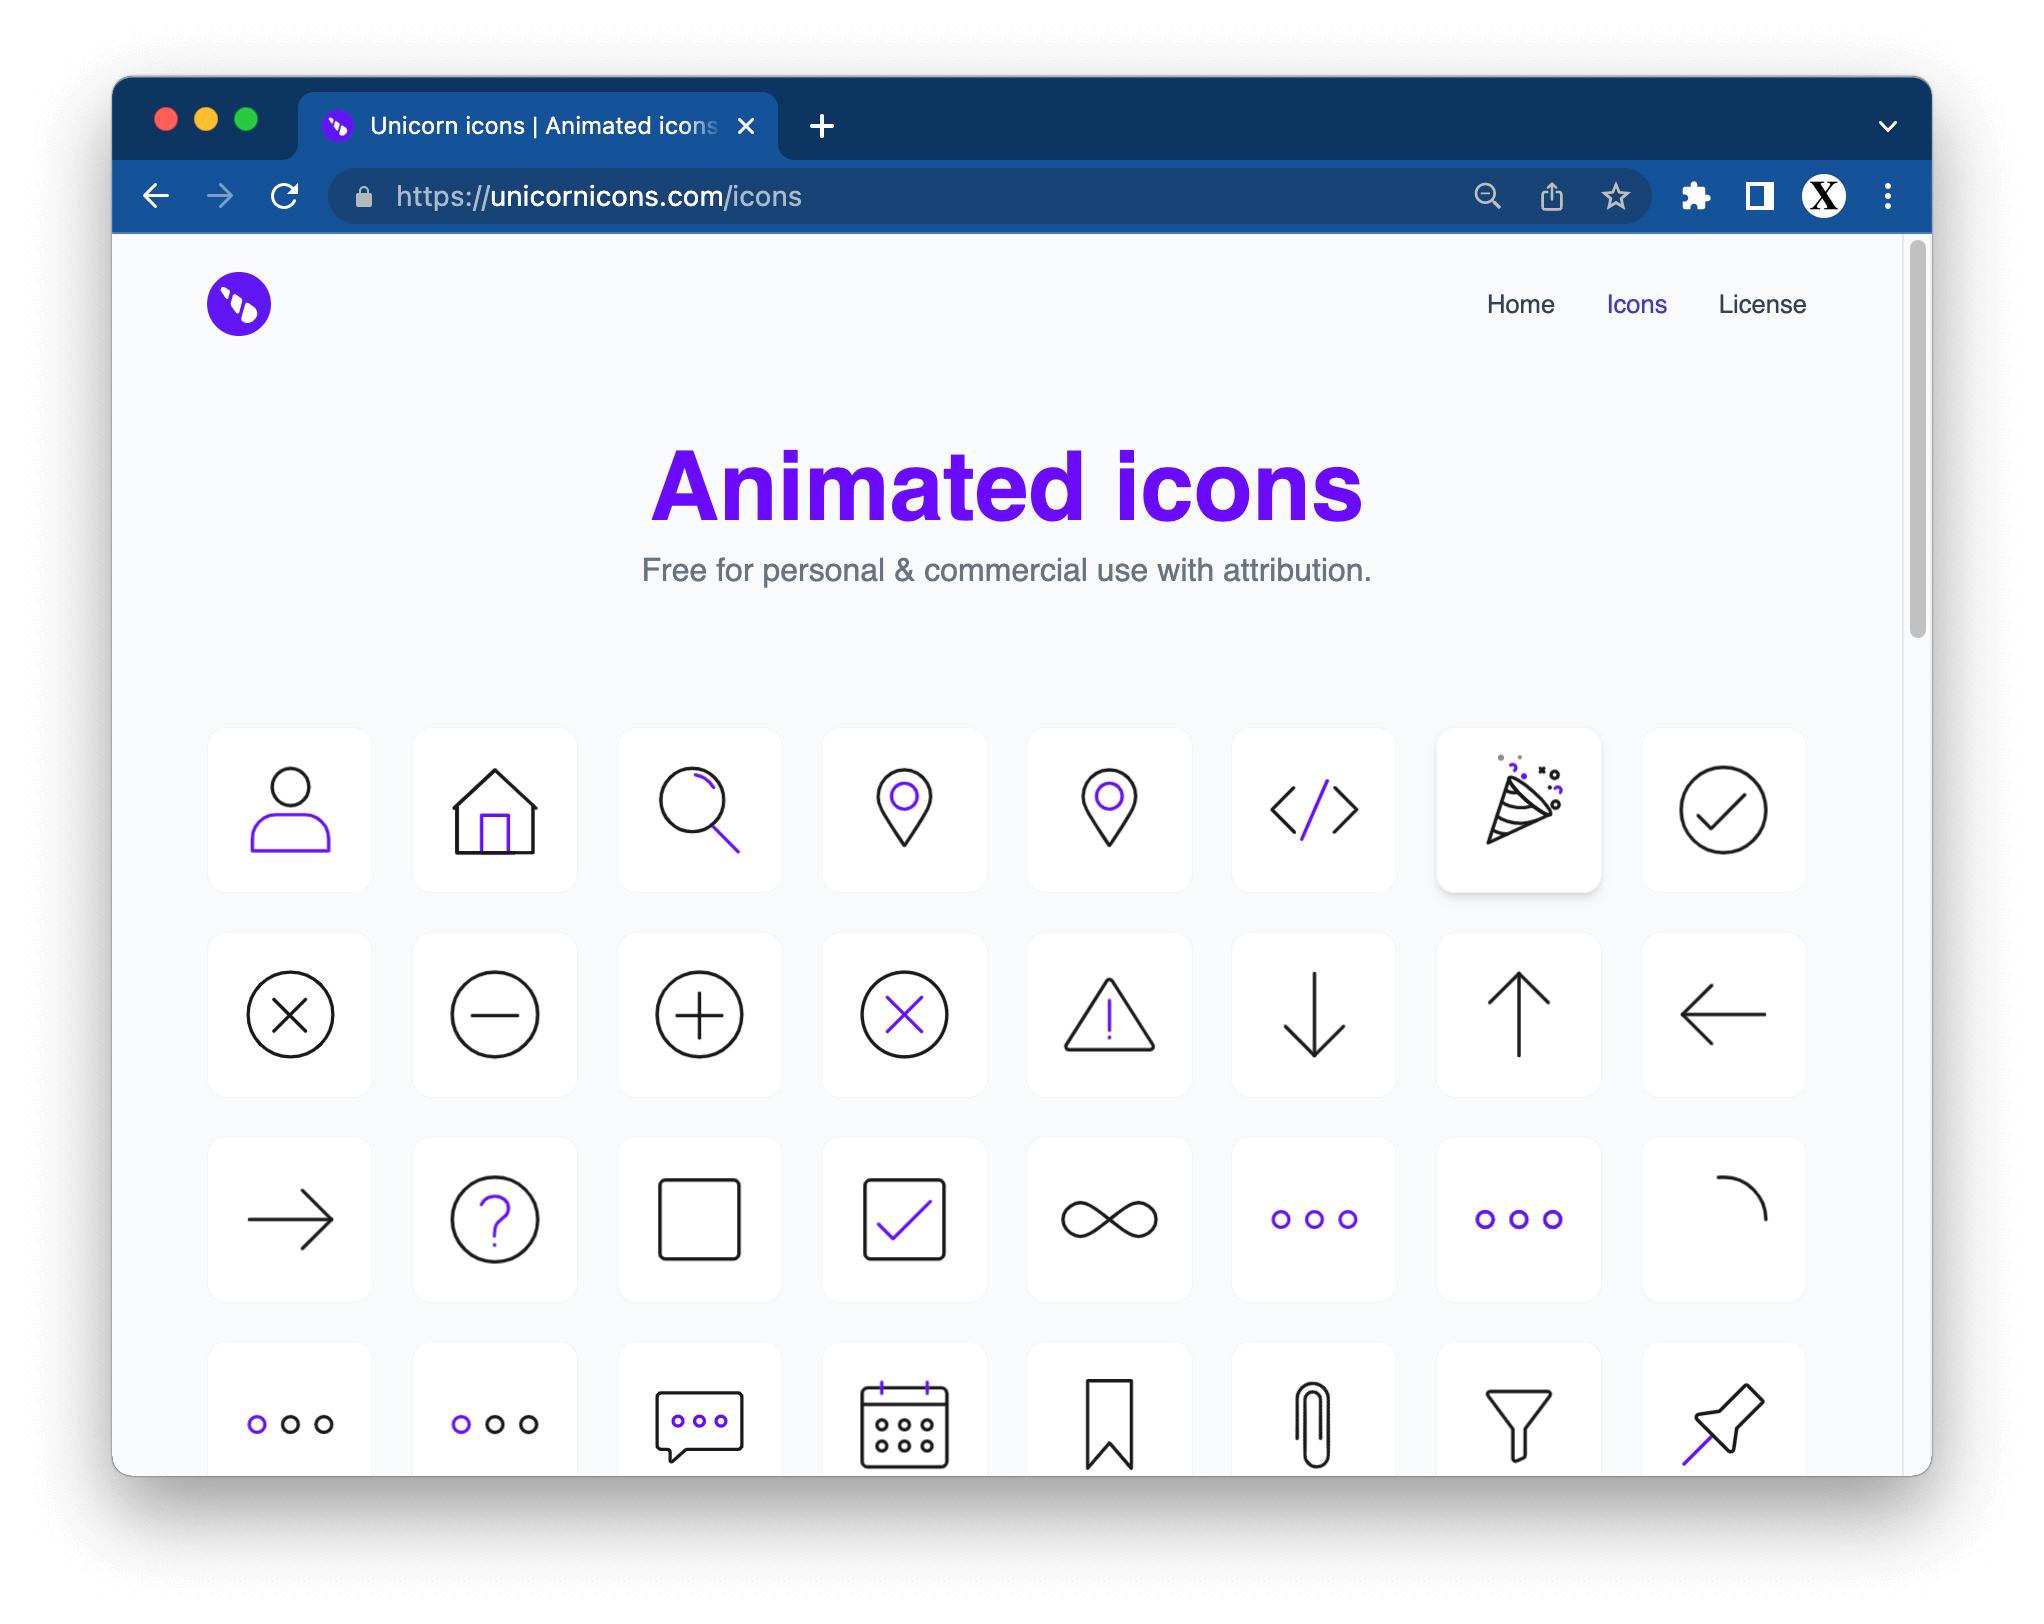 Unicorn icons | Animated icons for your next project